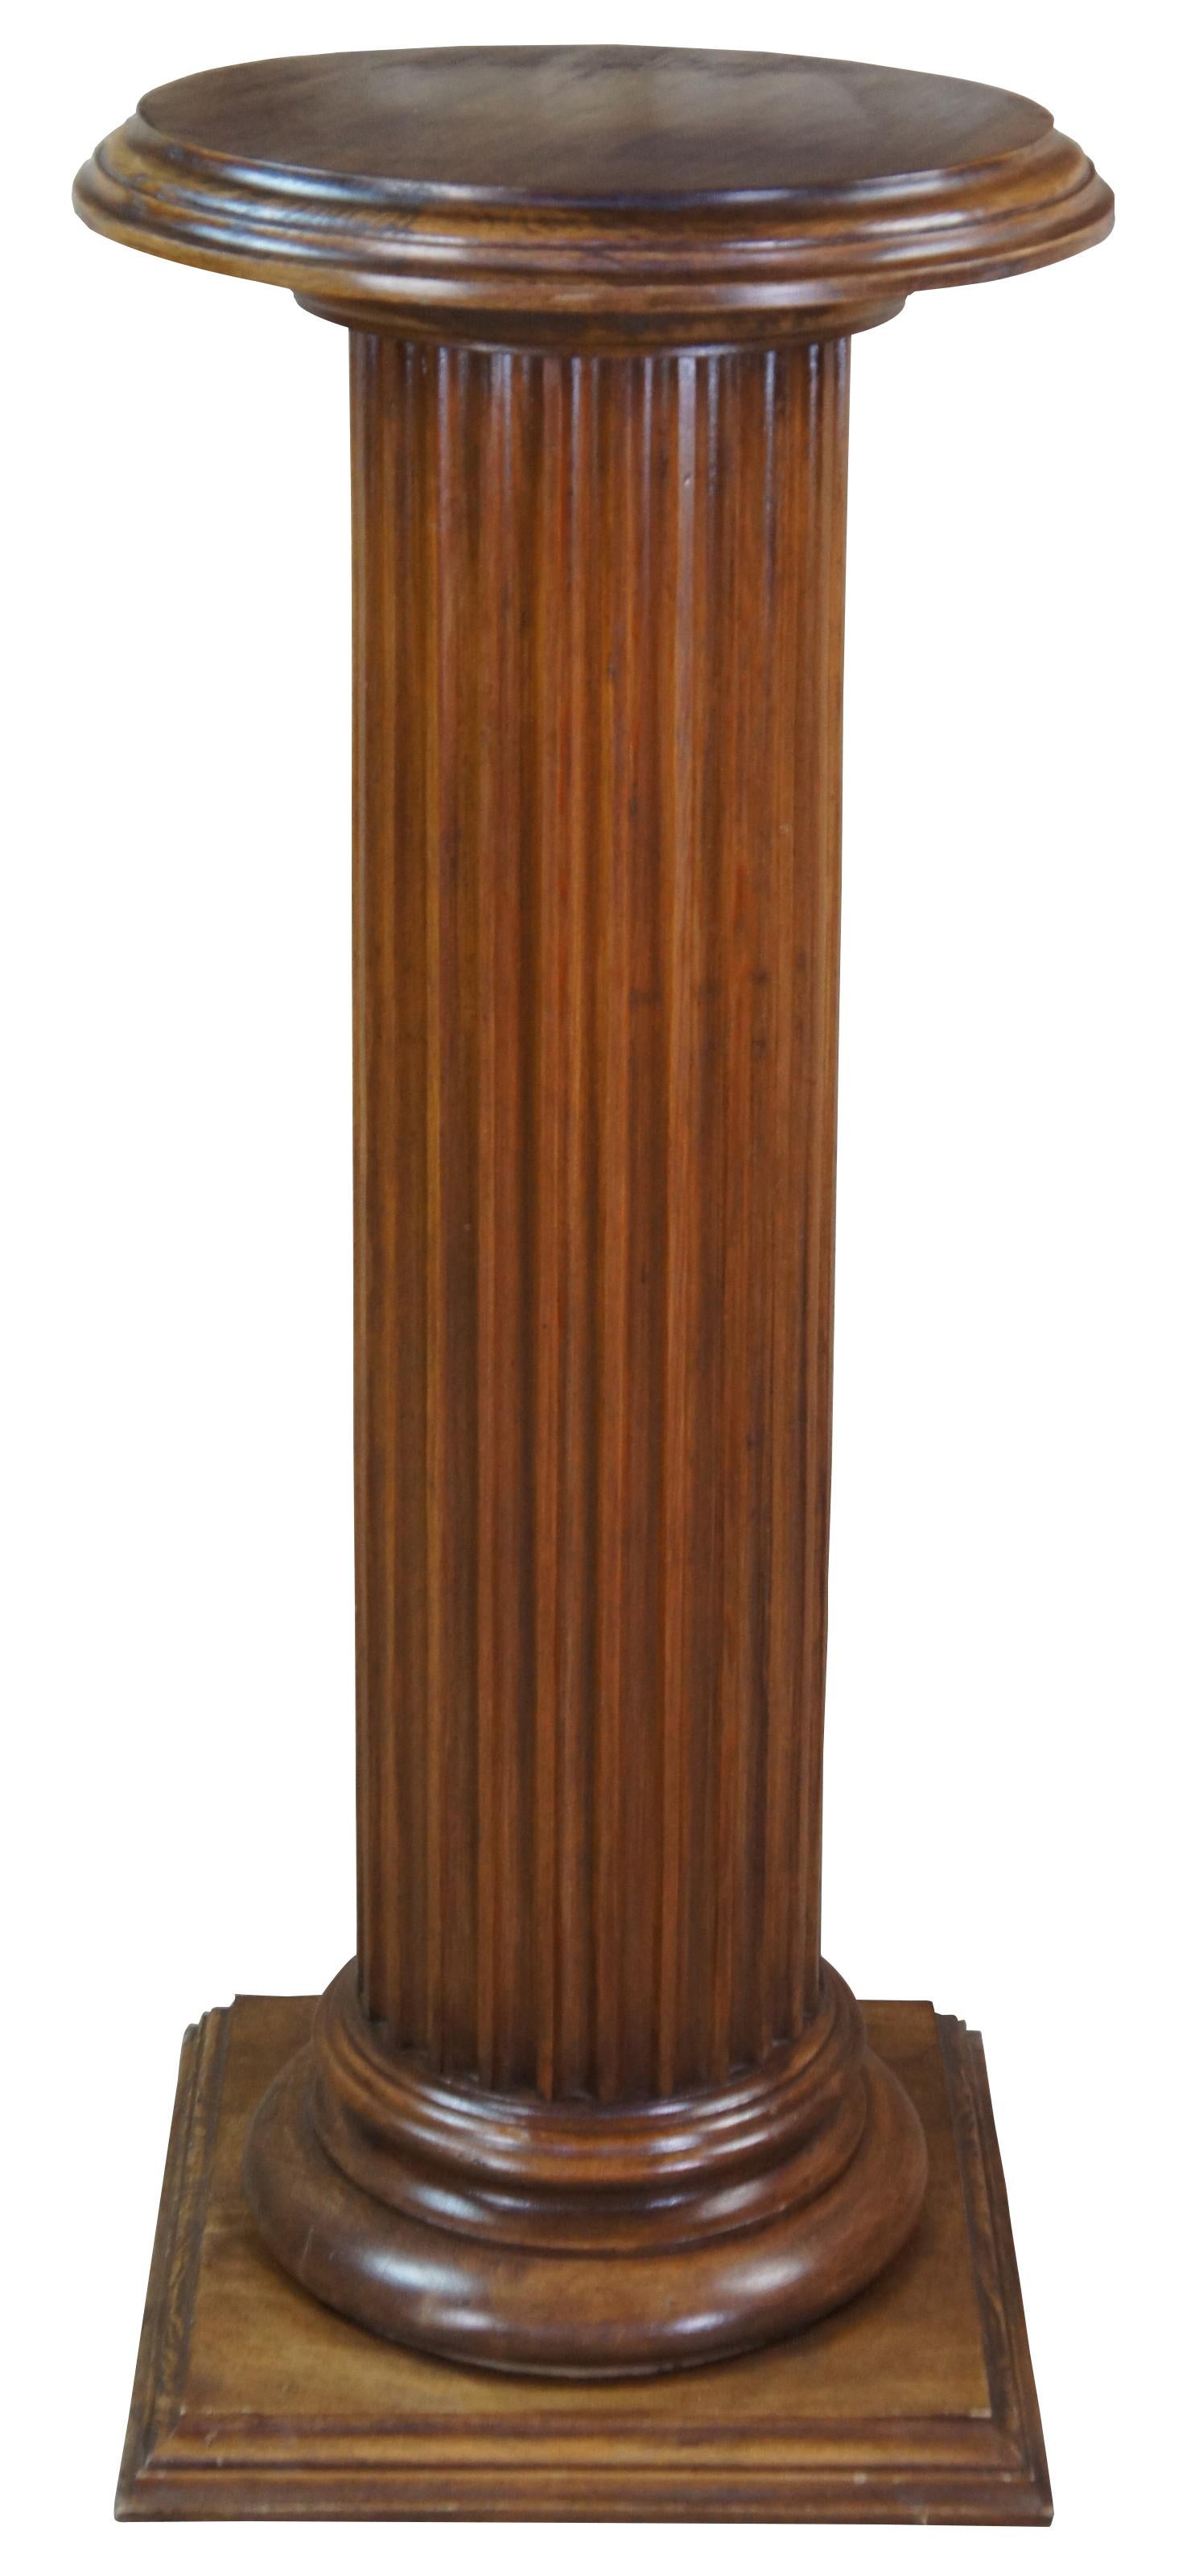 Monumental oak Corinthian pedestal or plant stand featuring a fluted column, square base and round top. Measure: 44